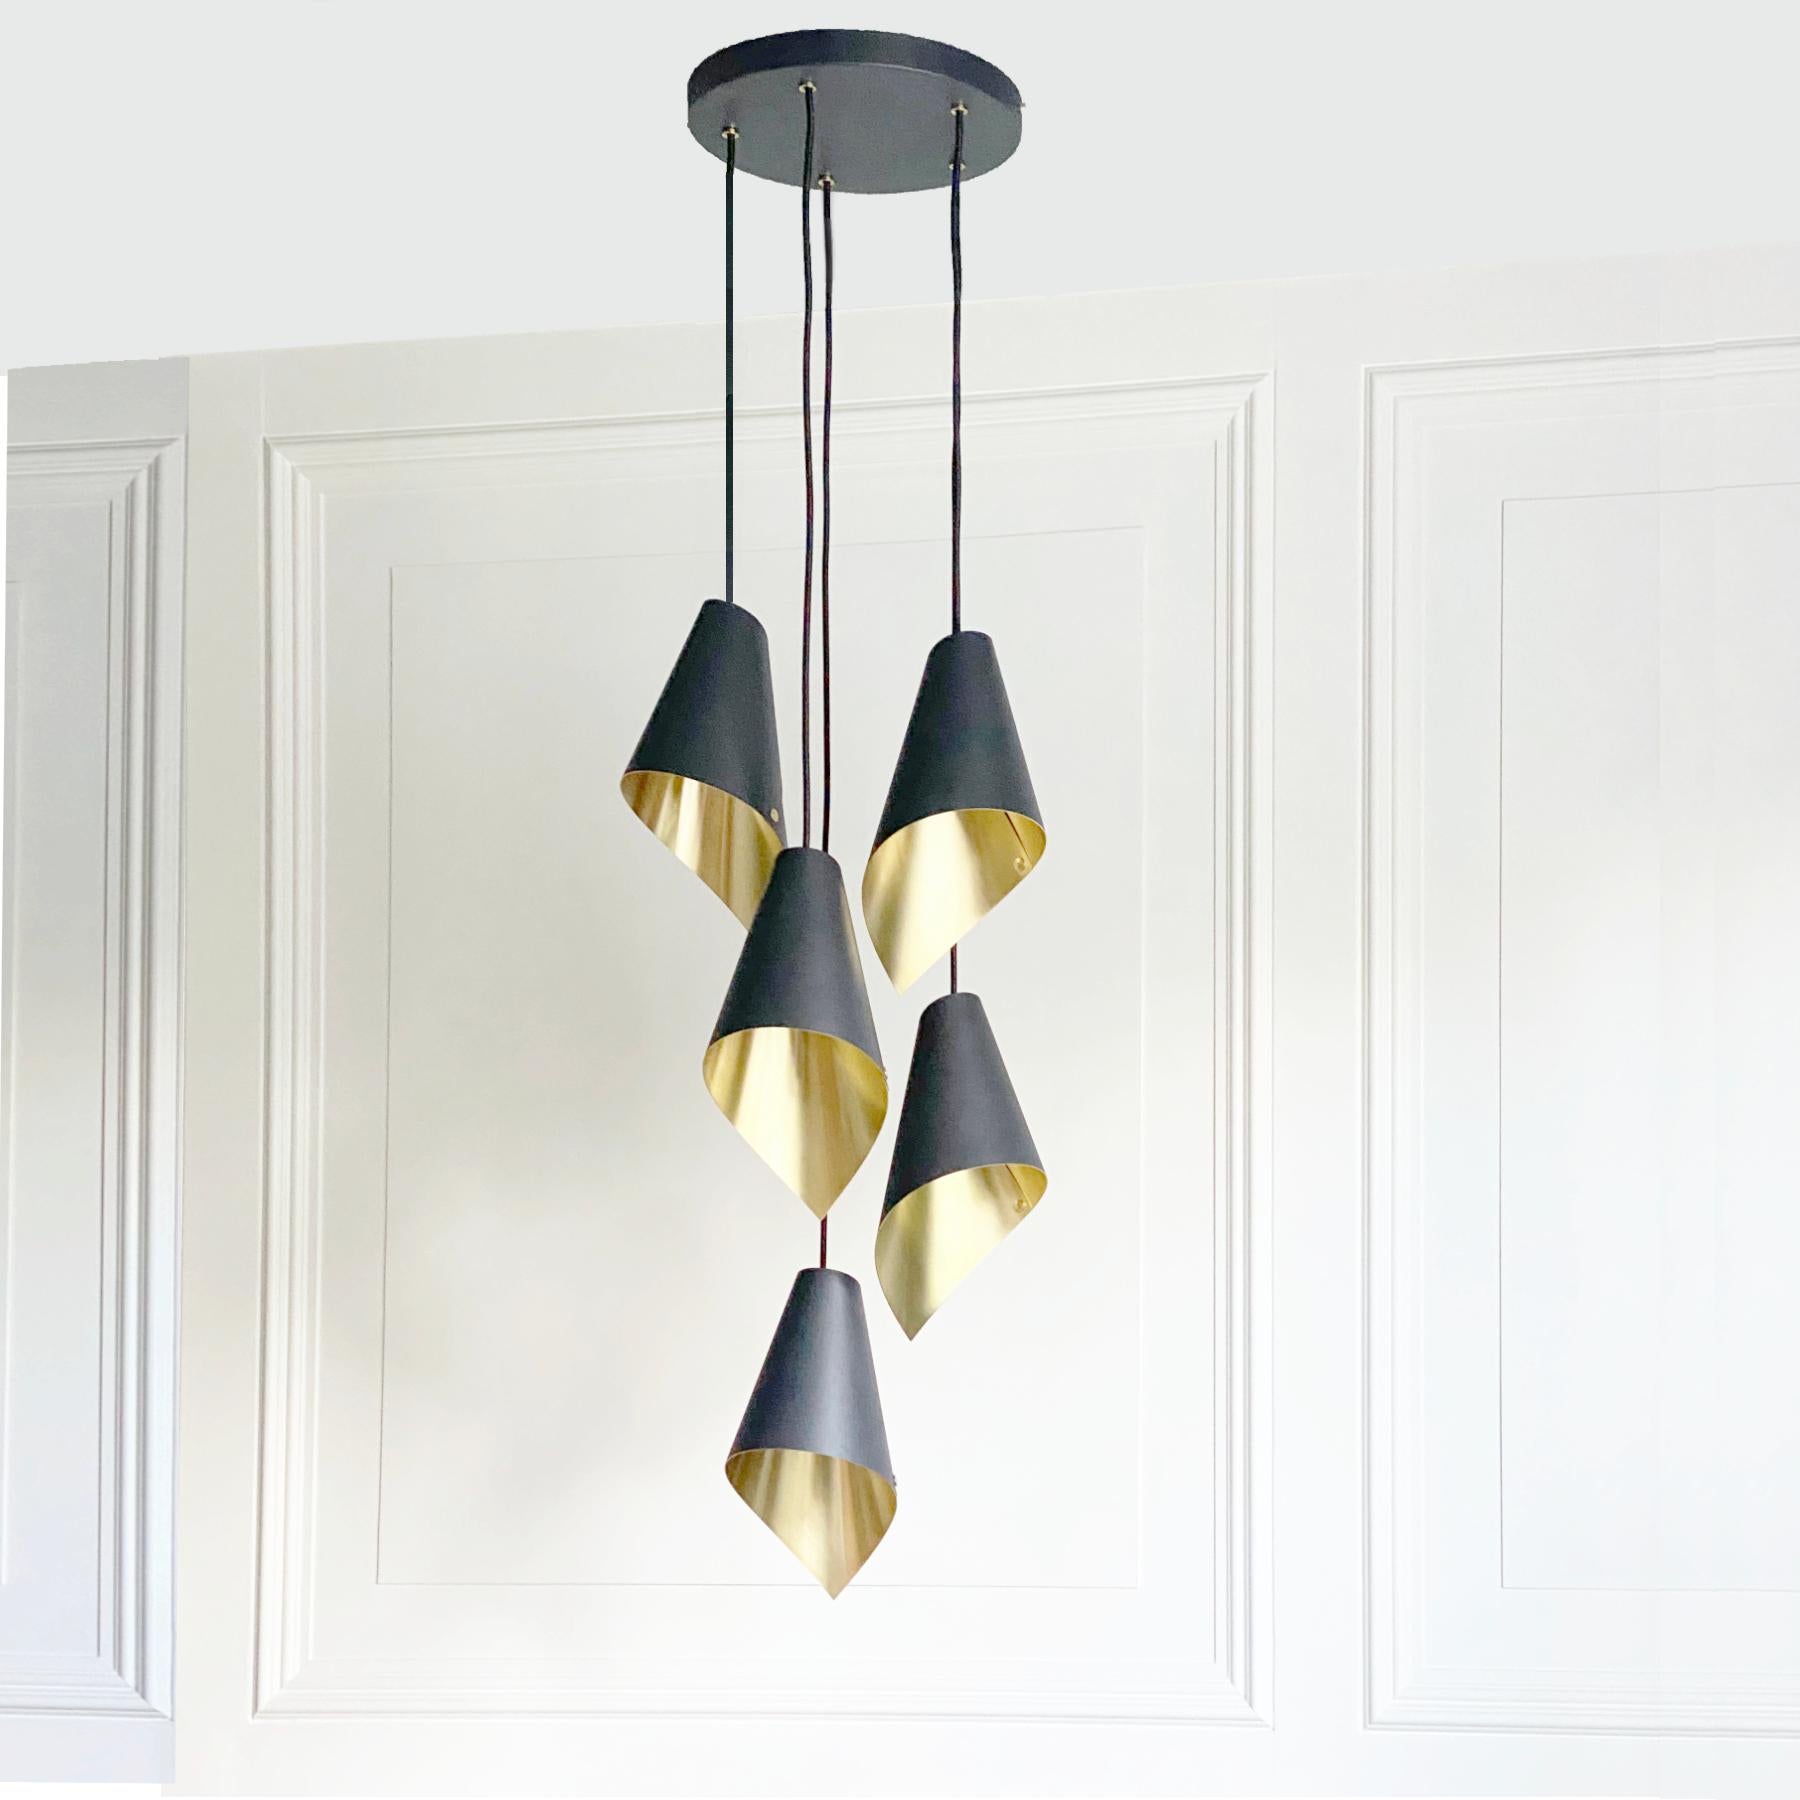 Introducing our Brushed Brass & Matte Black Pendant Light from our debut ‘ARC’ collection. With a black external surface in contrast to its beautiful brass interior, this Pendant Light can be used in many different environments to stunning effect.